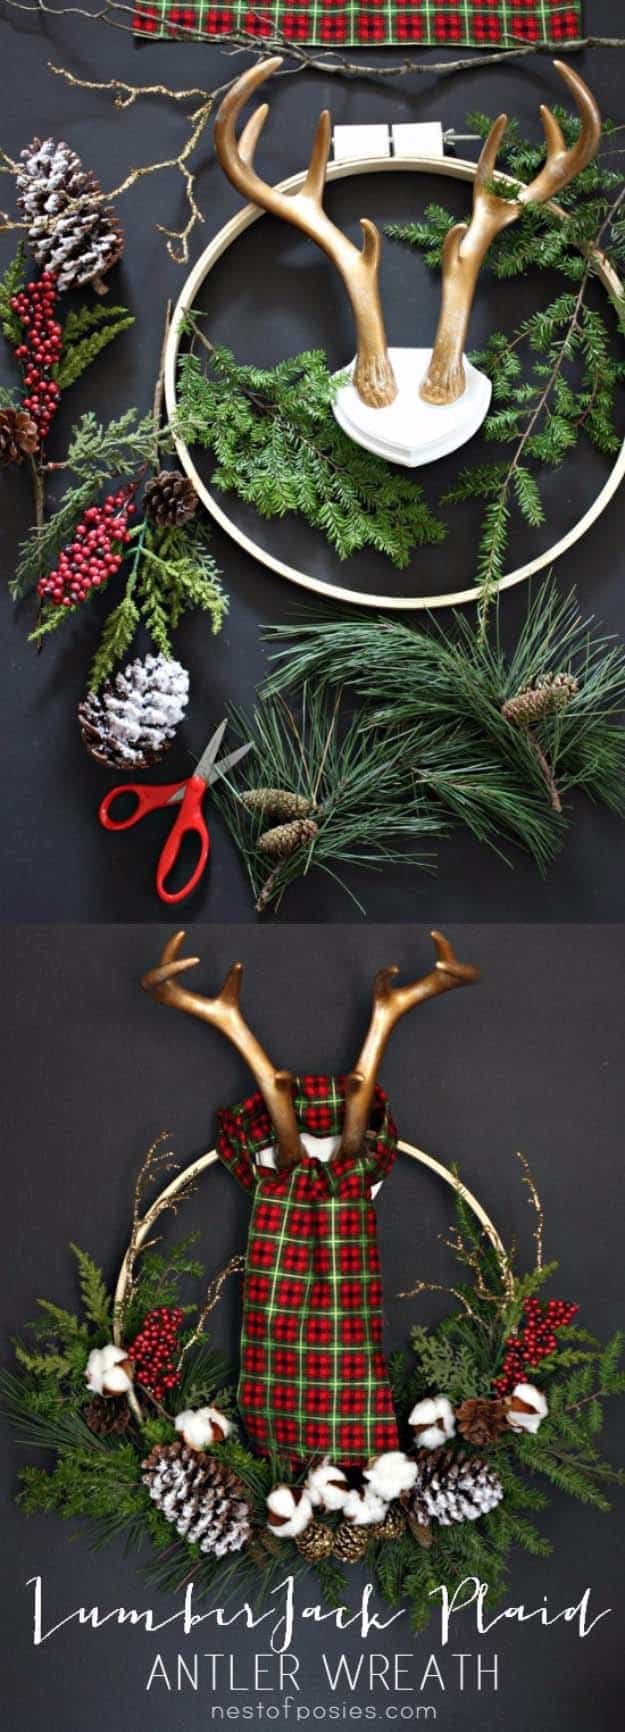 DIY Holiday Wreaths Make Awesome Homemade Christmas Decorations for Your Front Door | Cool Crafts and DIY Projects by DIY JOY | Lumberjack Plaid Antler Wreath #diy 